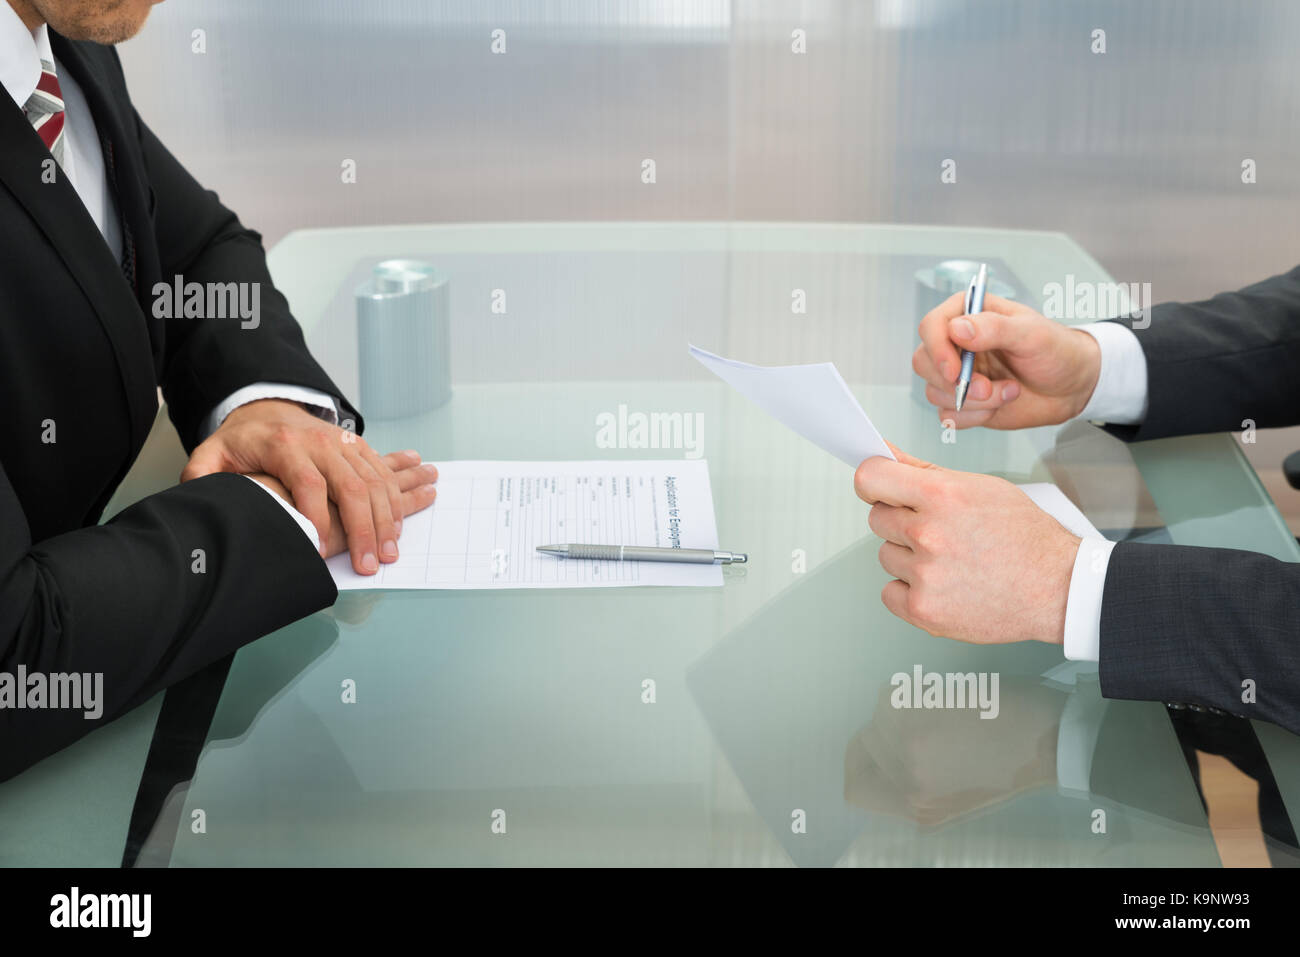 Businessman Conducting An Employment Interview With Application Form On Office Desk Stock Photo